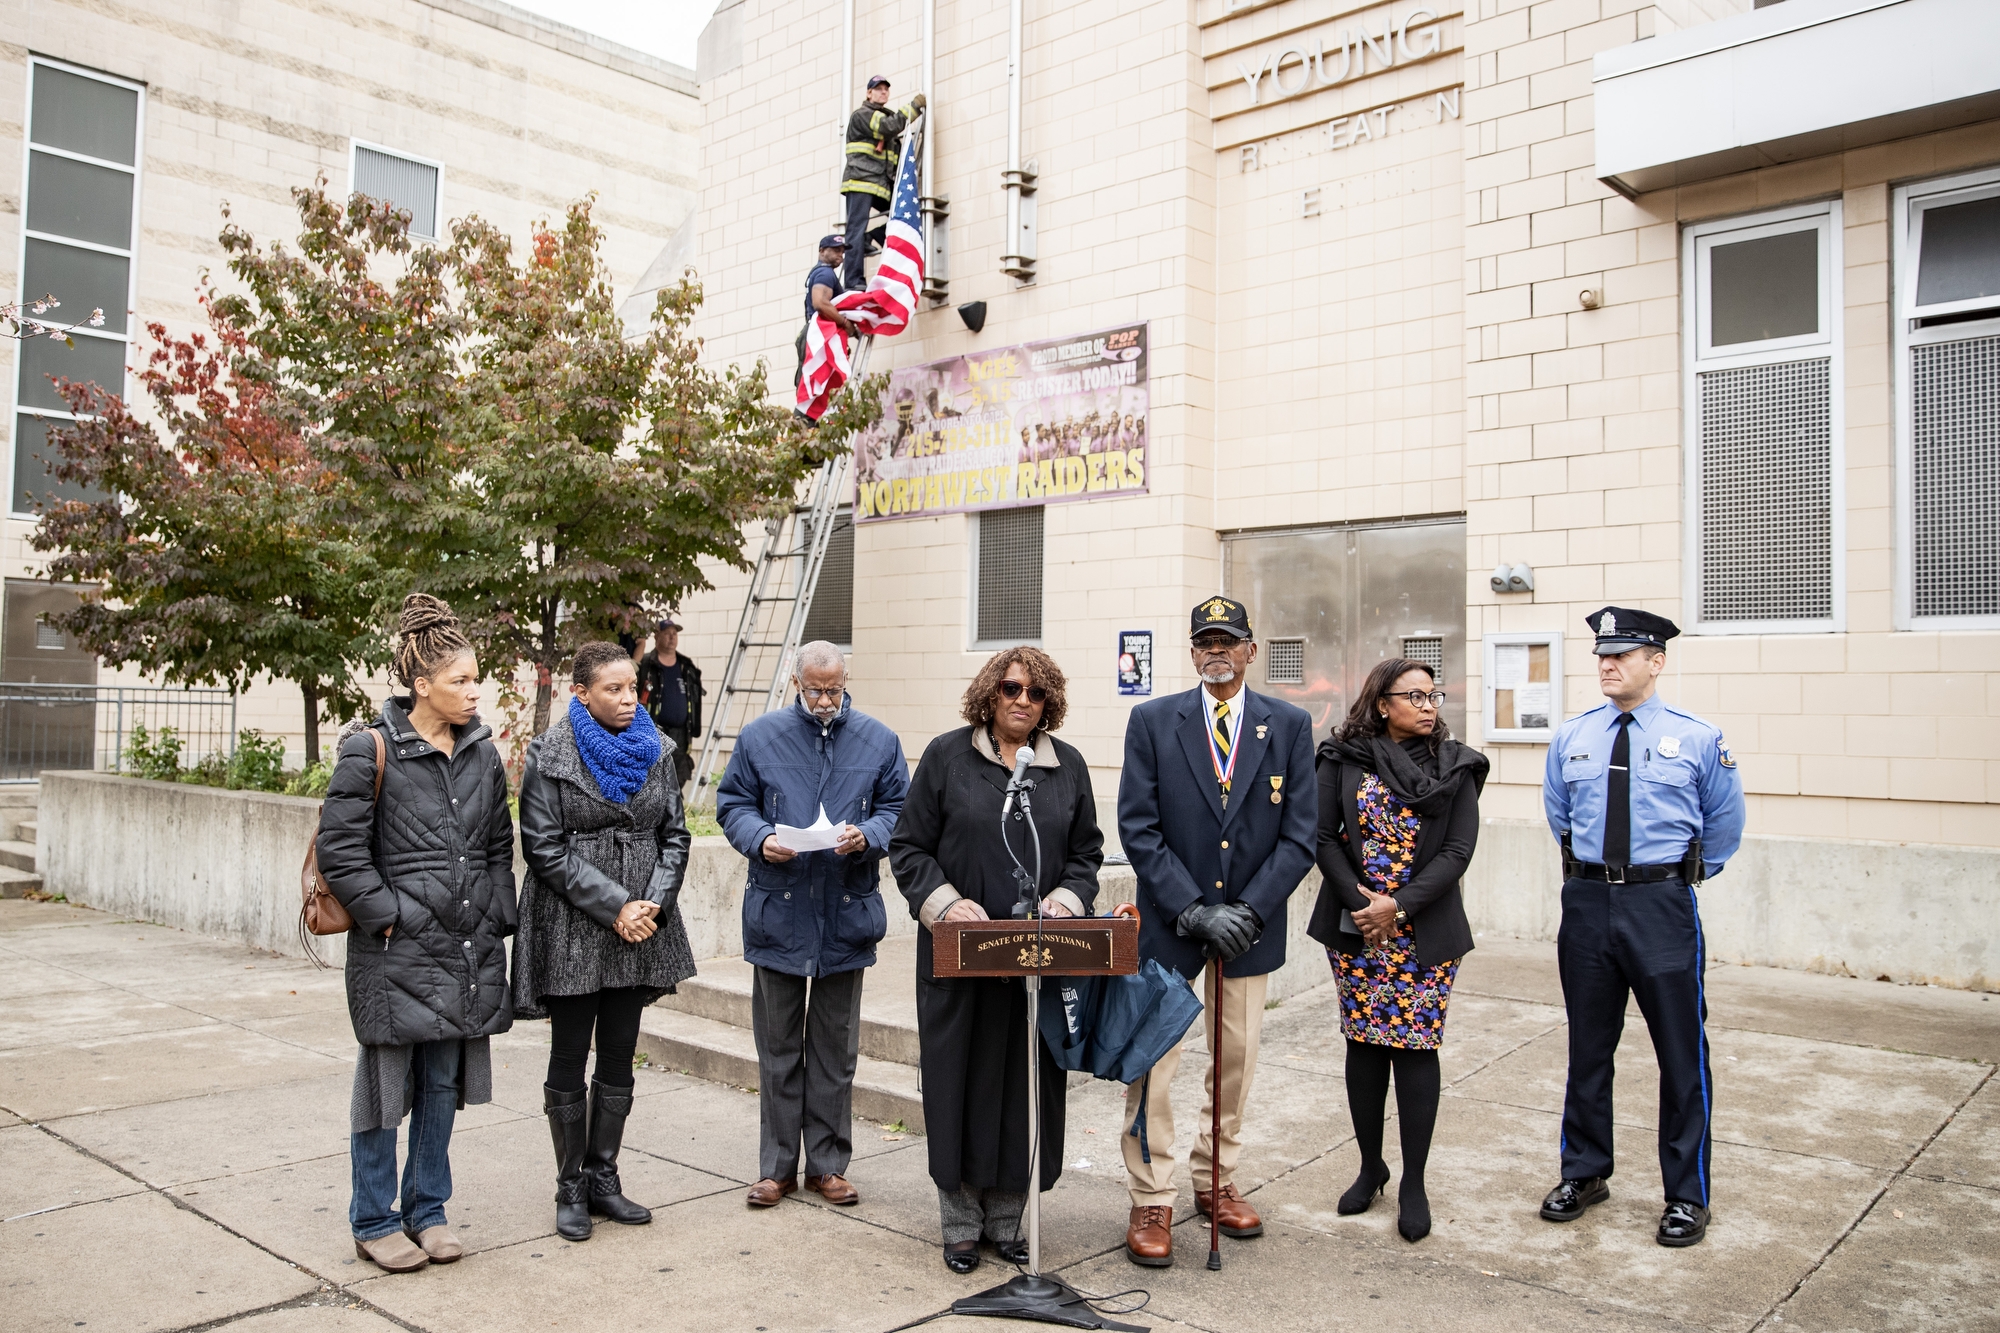 Noviembre 9, 2018: In honor of Veterans Day, Senator Haywood held a ceremony to raise the flag at Lonnie Young Recreation Center and to pay tribute to our veterans.